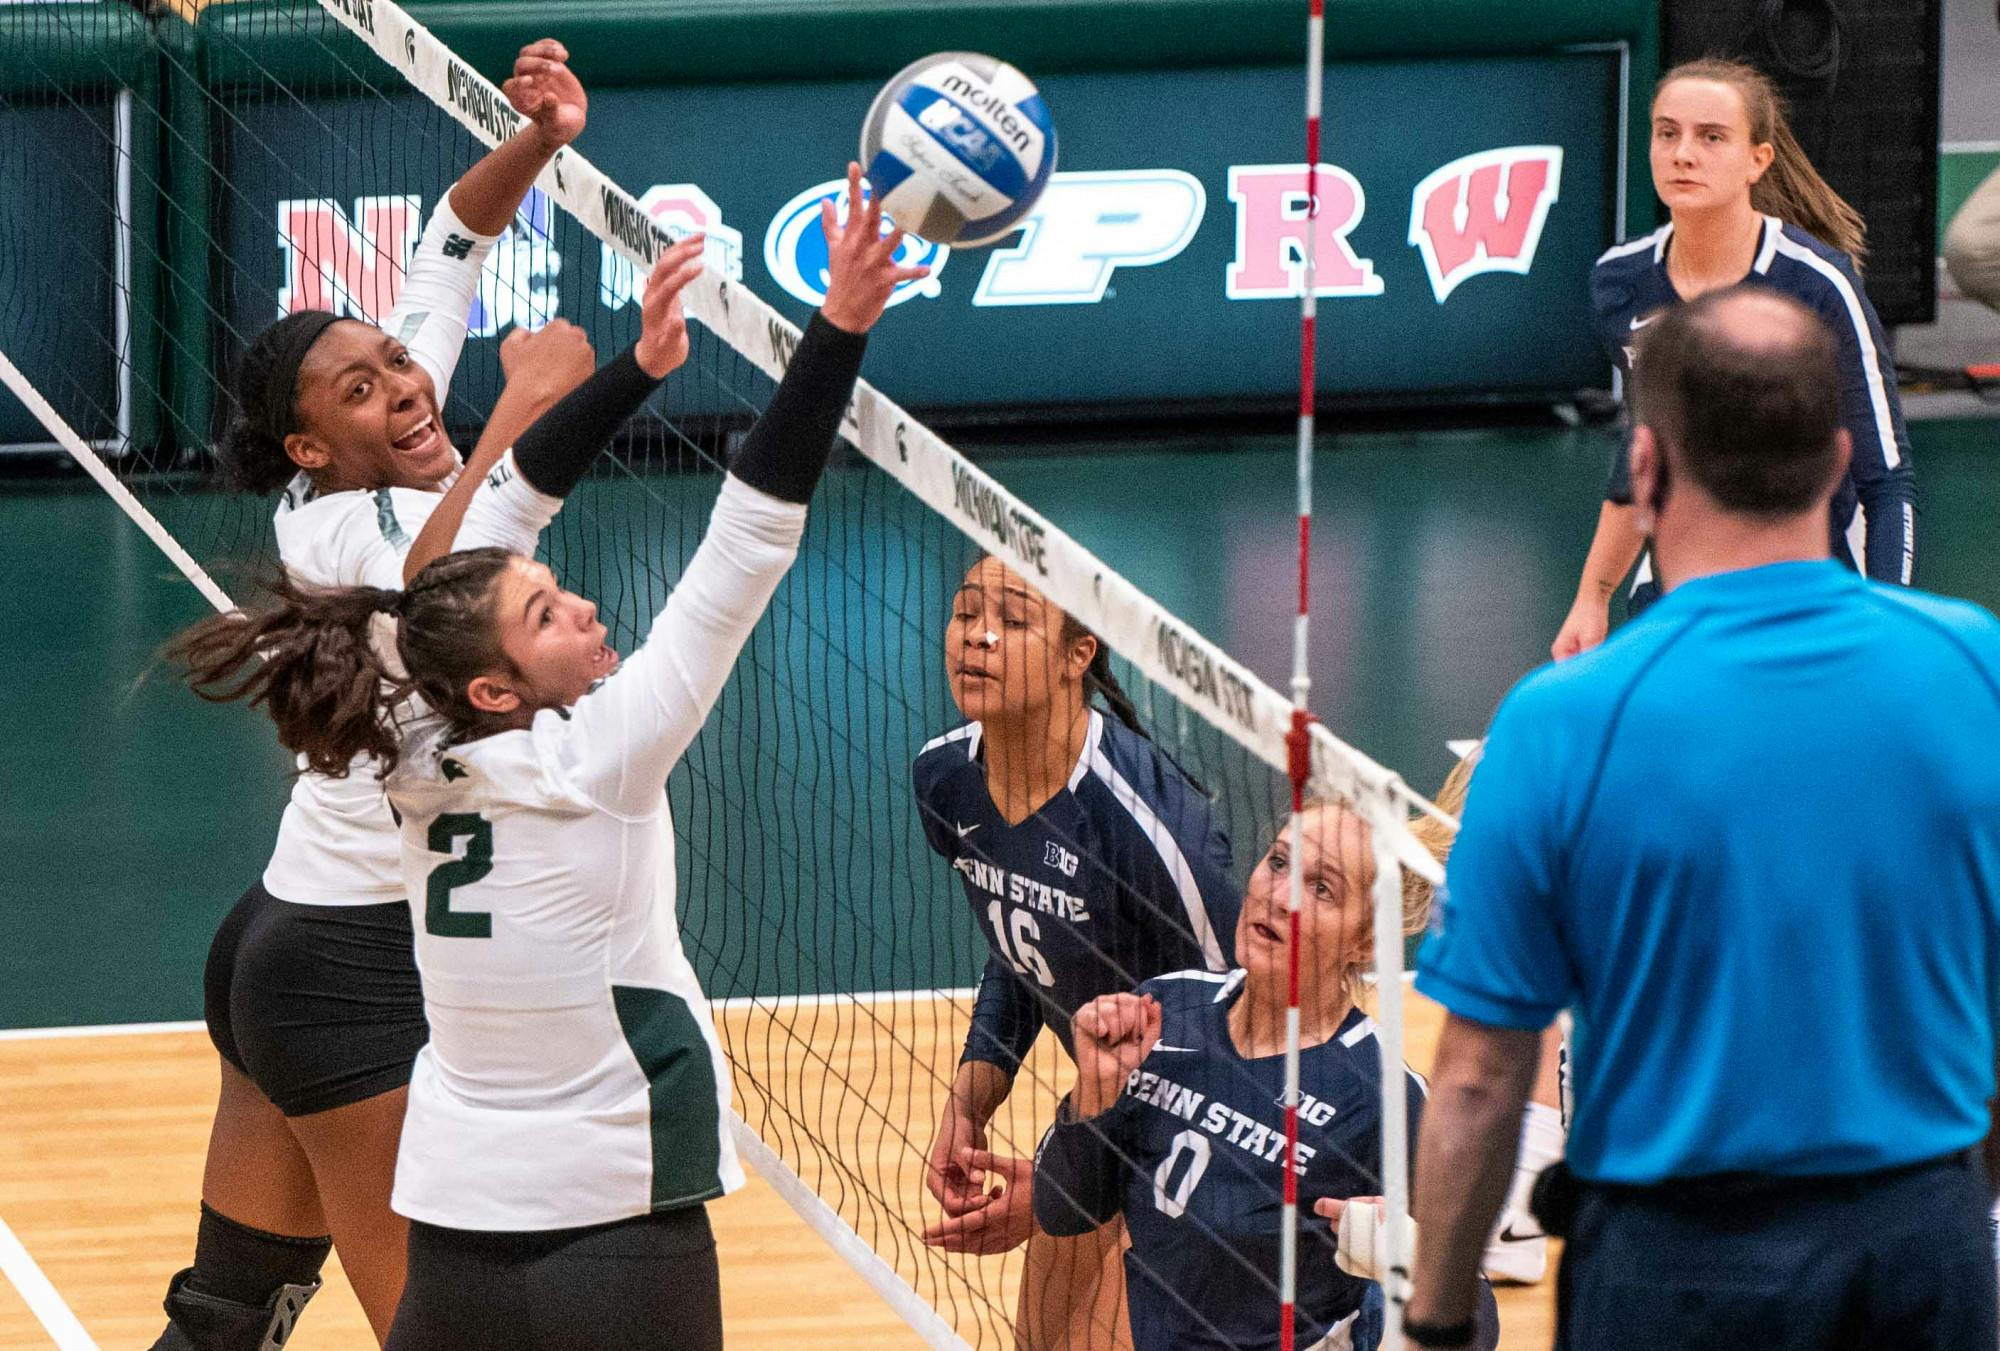 <p>Freshman setter Celia Cullen (2) and junior middle blocker Naya Gros (17) block the ball in the first set against Penn State. The Nittany Lions shut out the Spartans, 3-0, on March 20, 2021. </p>